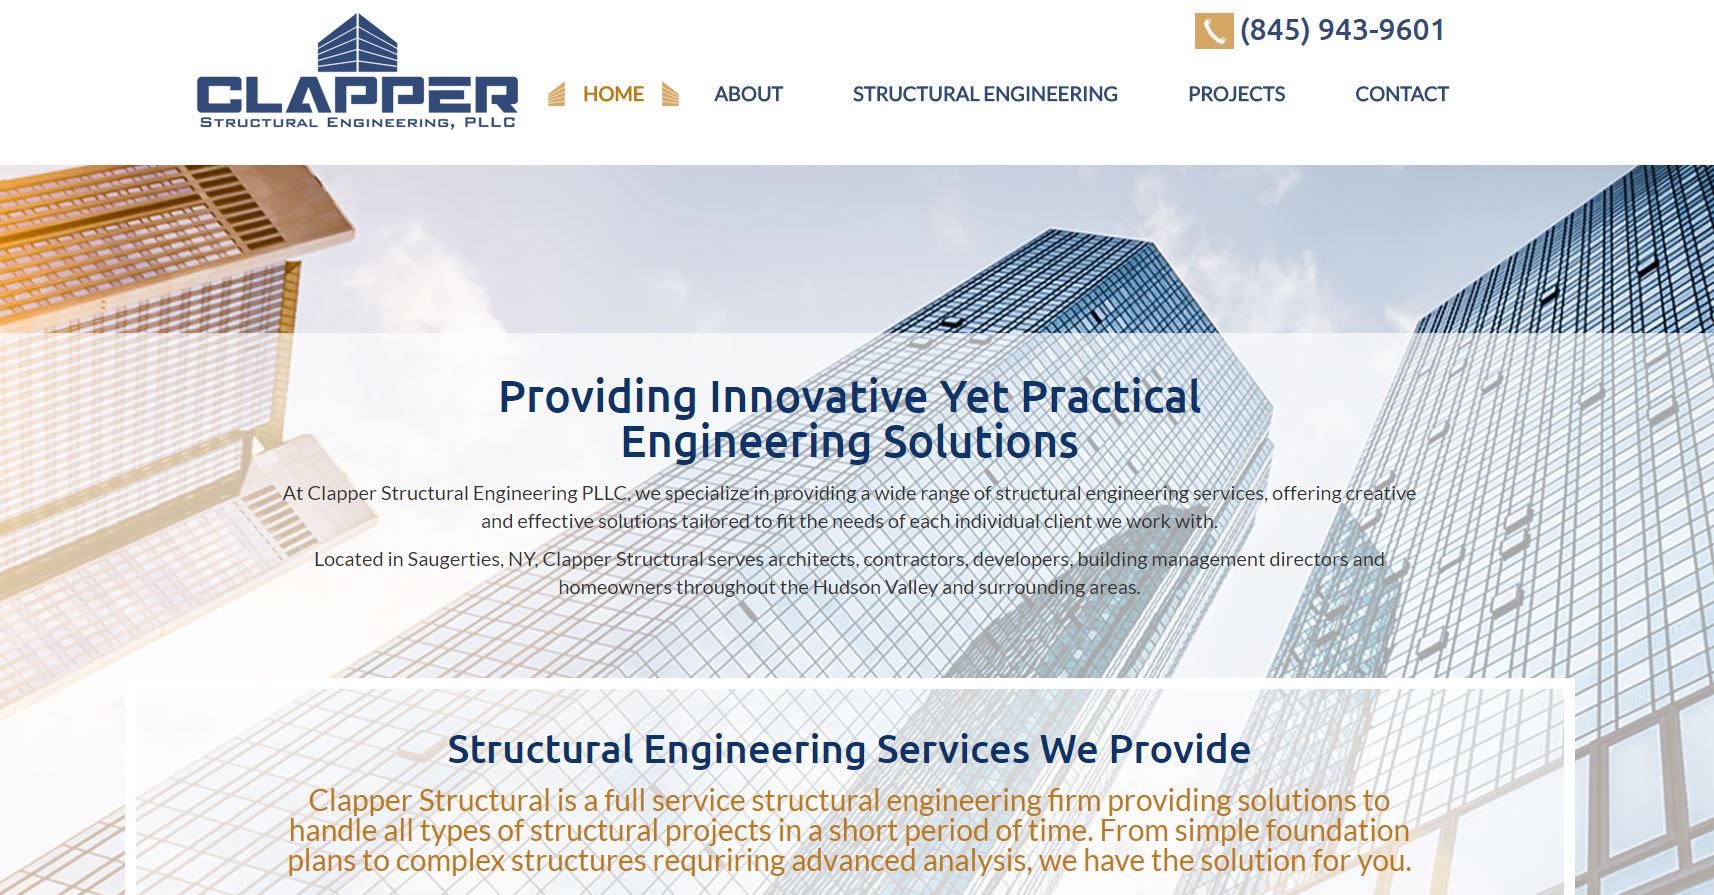 Clapper Structural Engineering's New Website